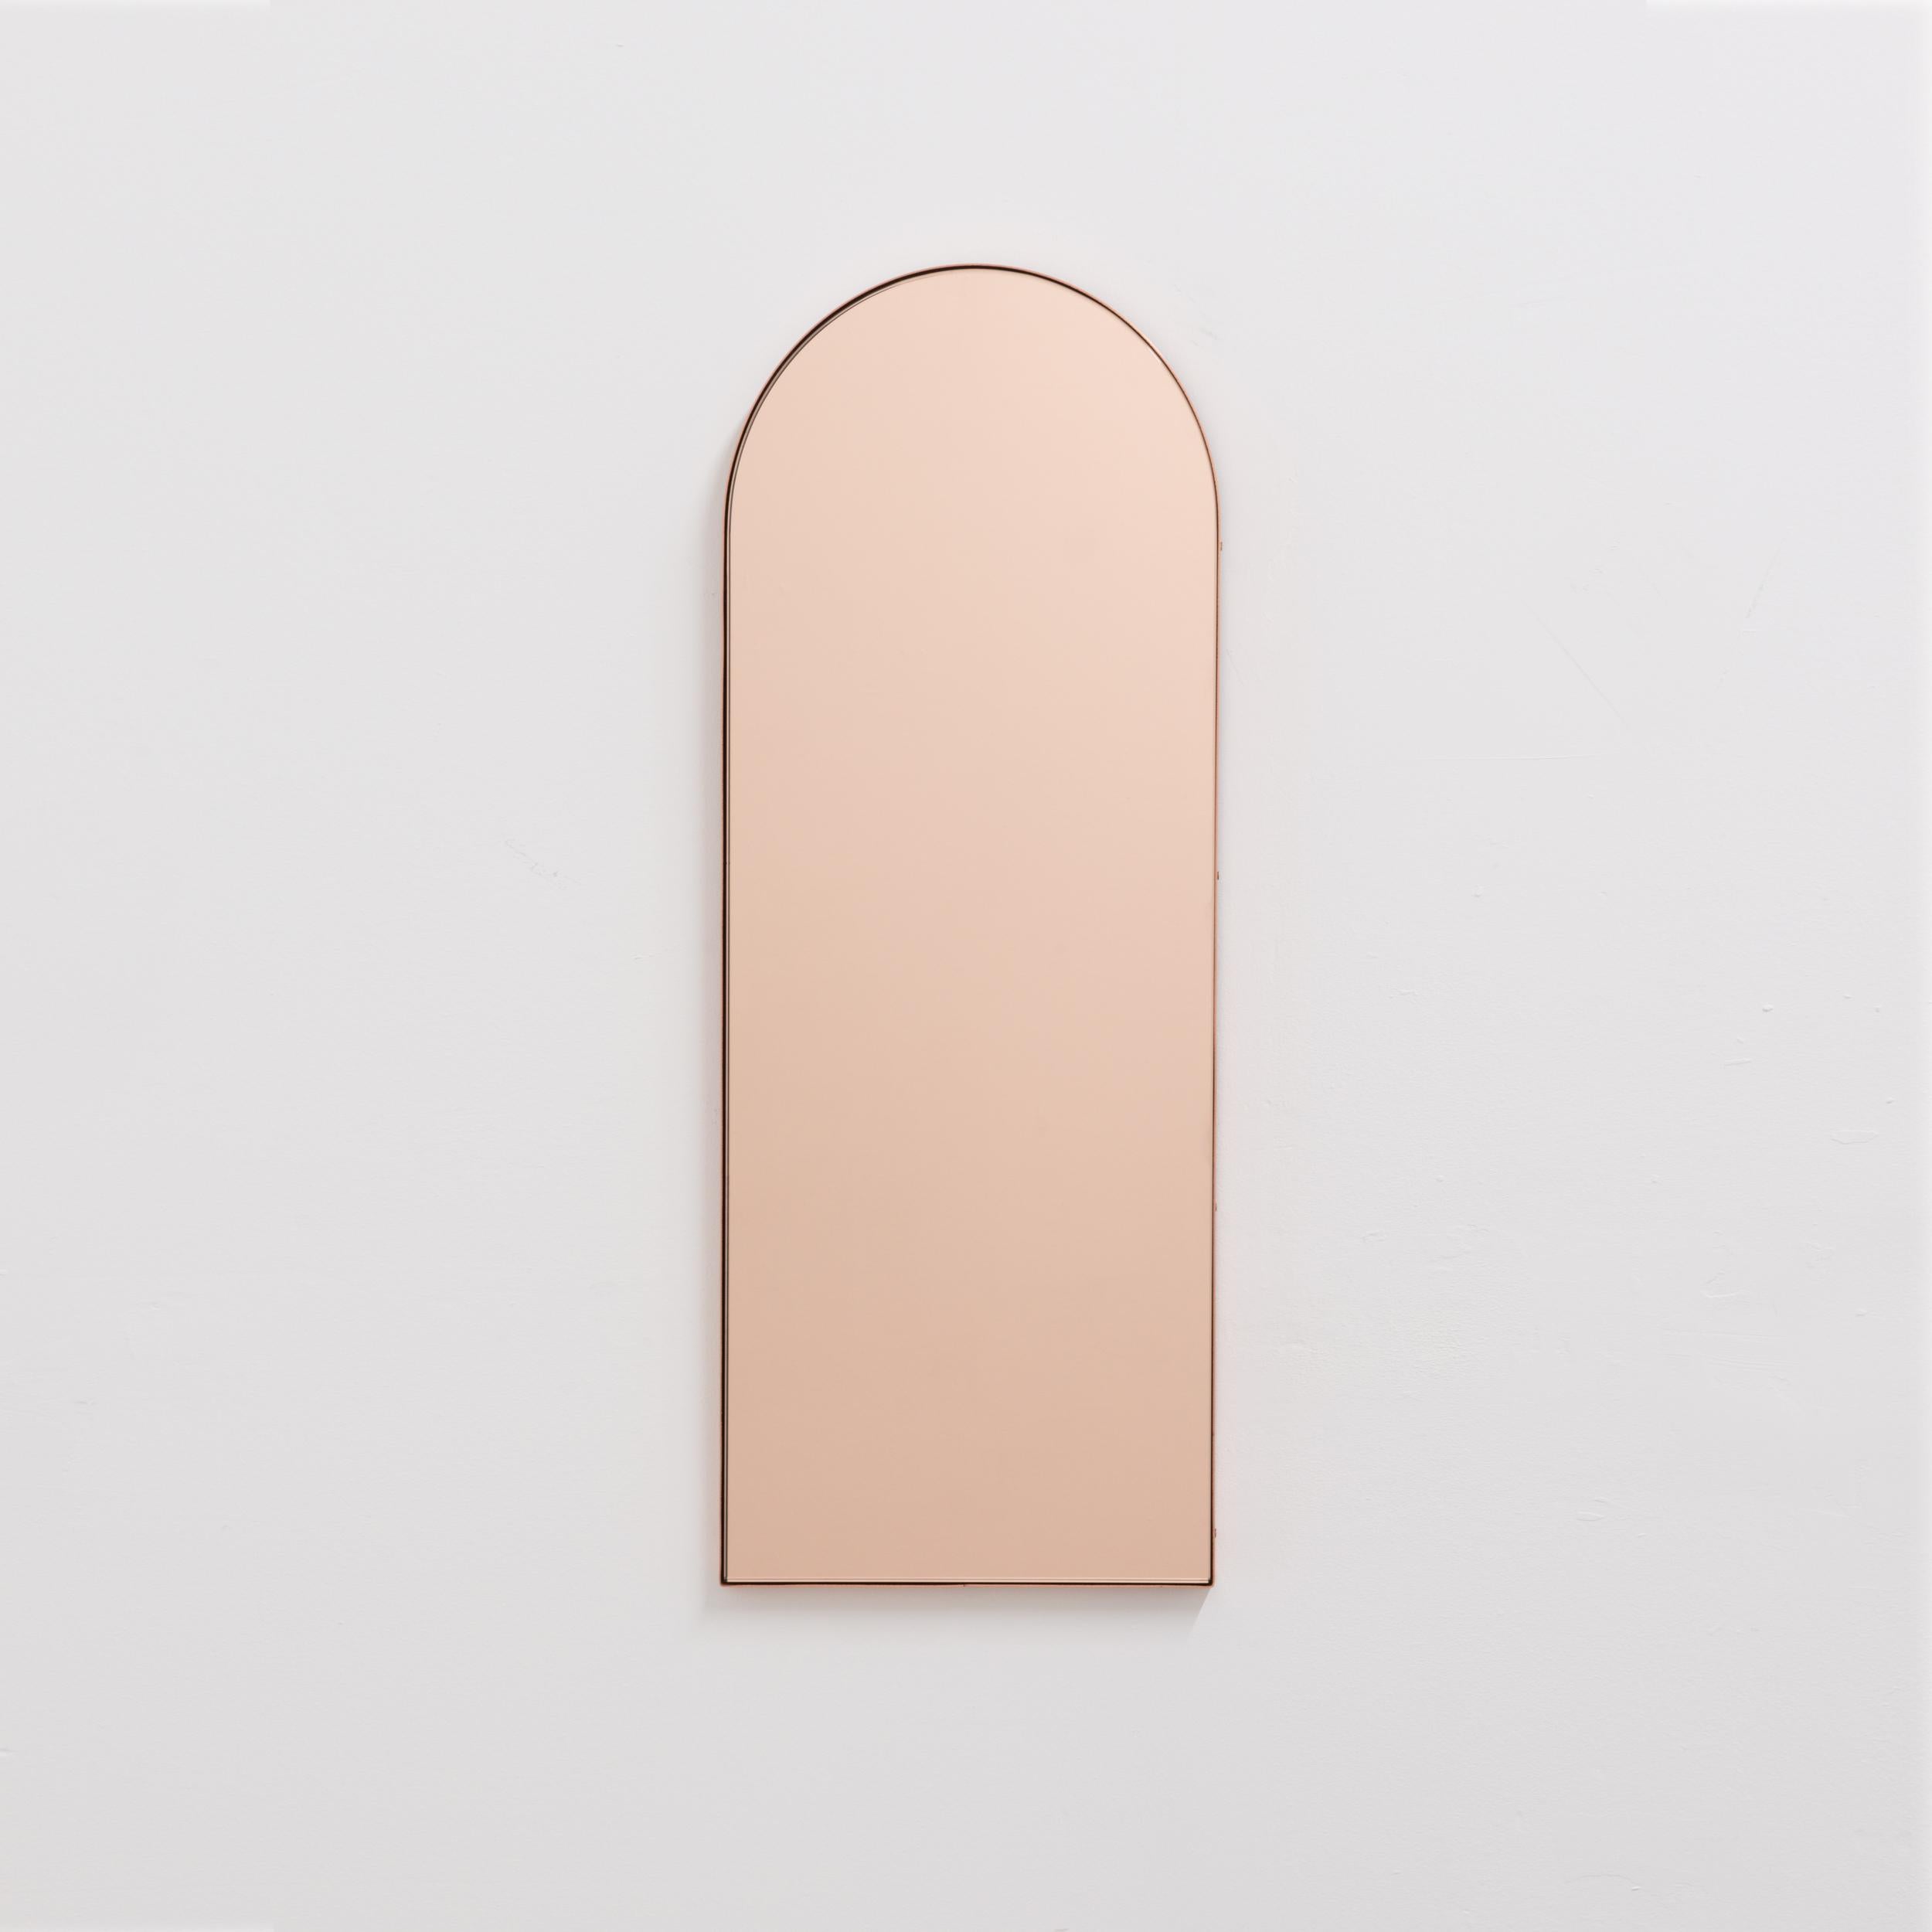 Arcus Arched Rose Gold Modern Wall Mirror with Copper Frame, XL For Sale 2